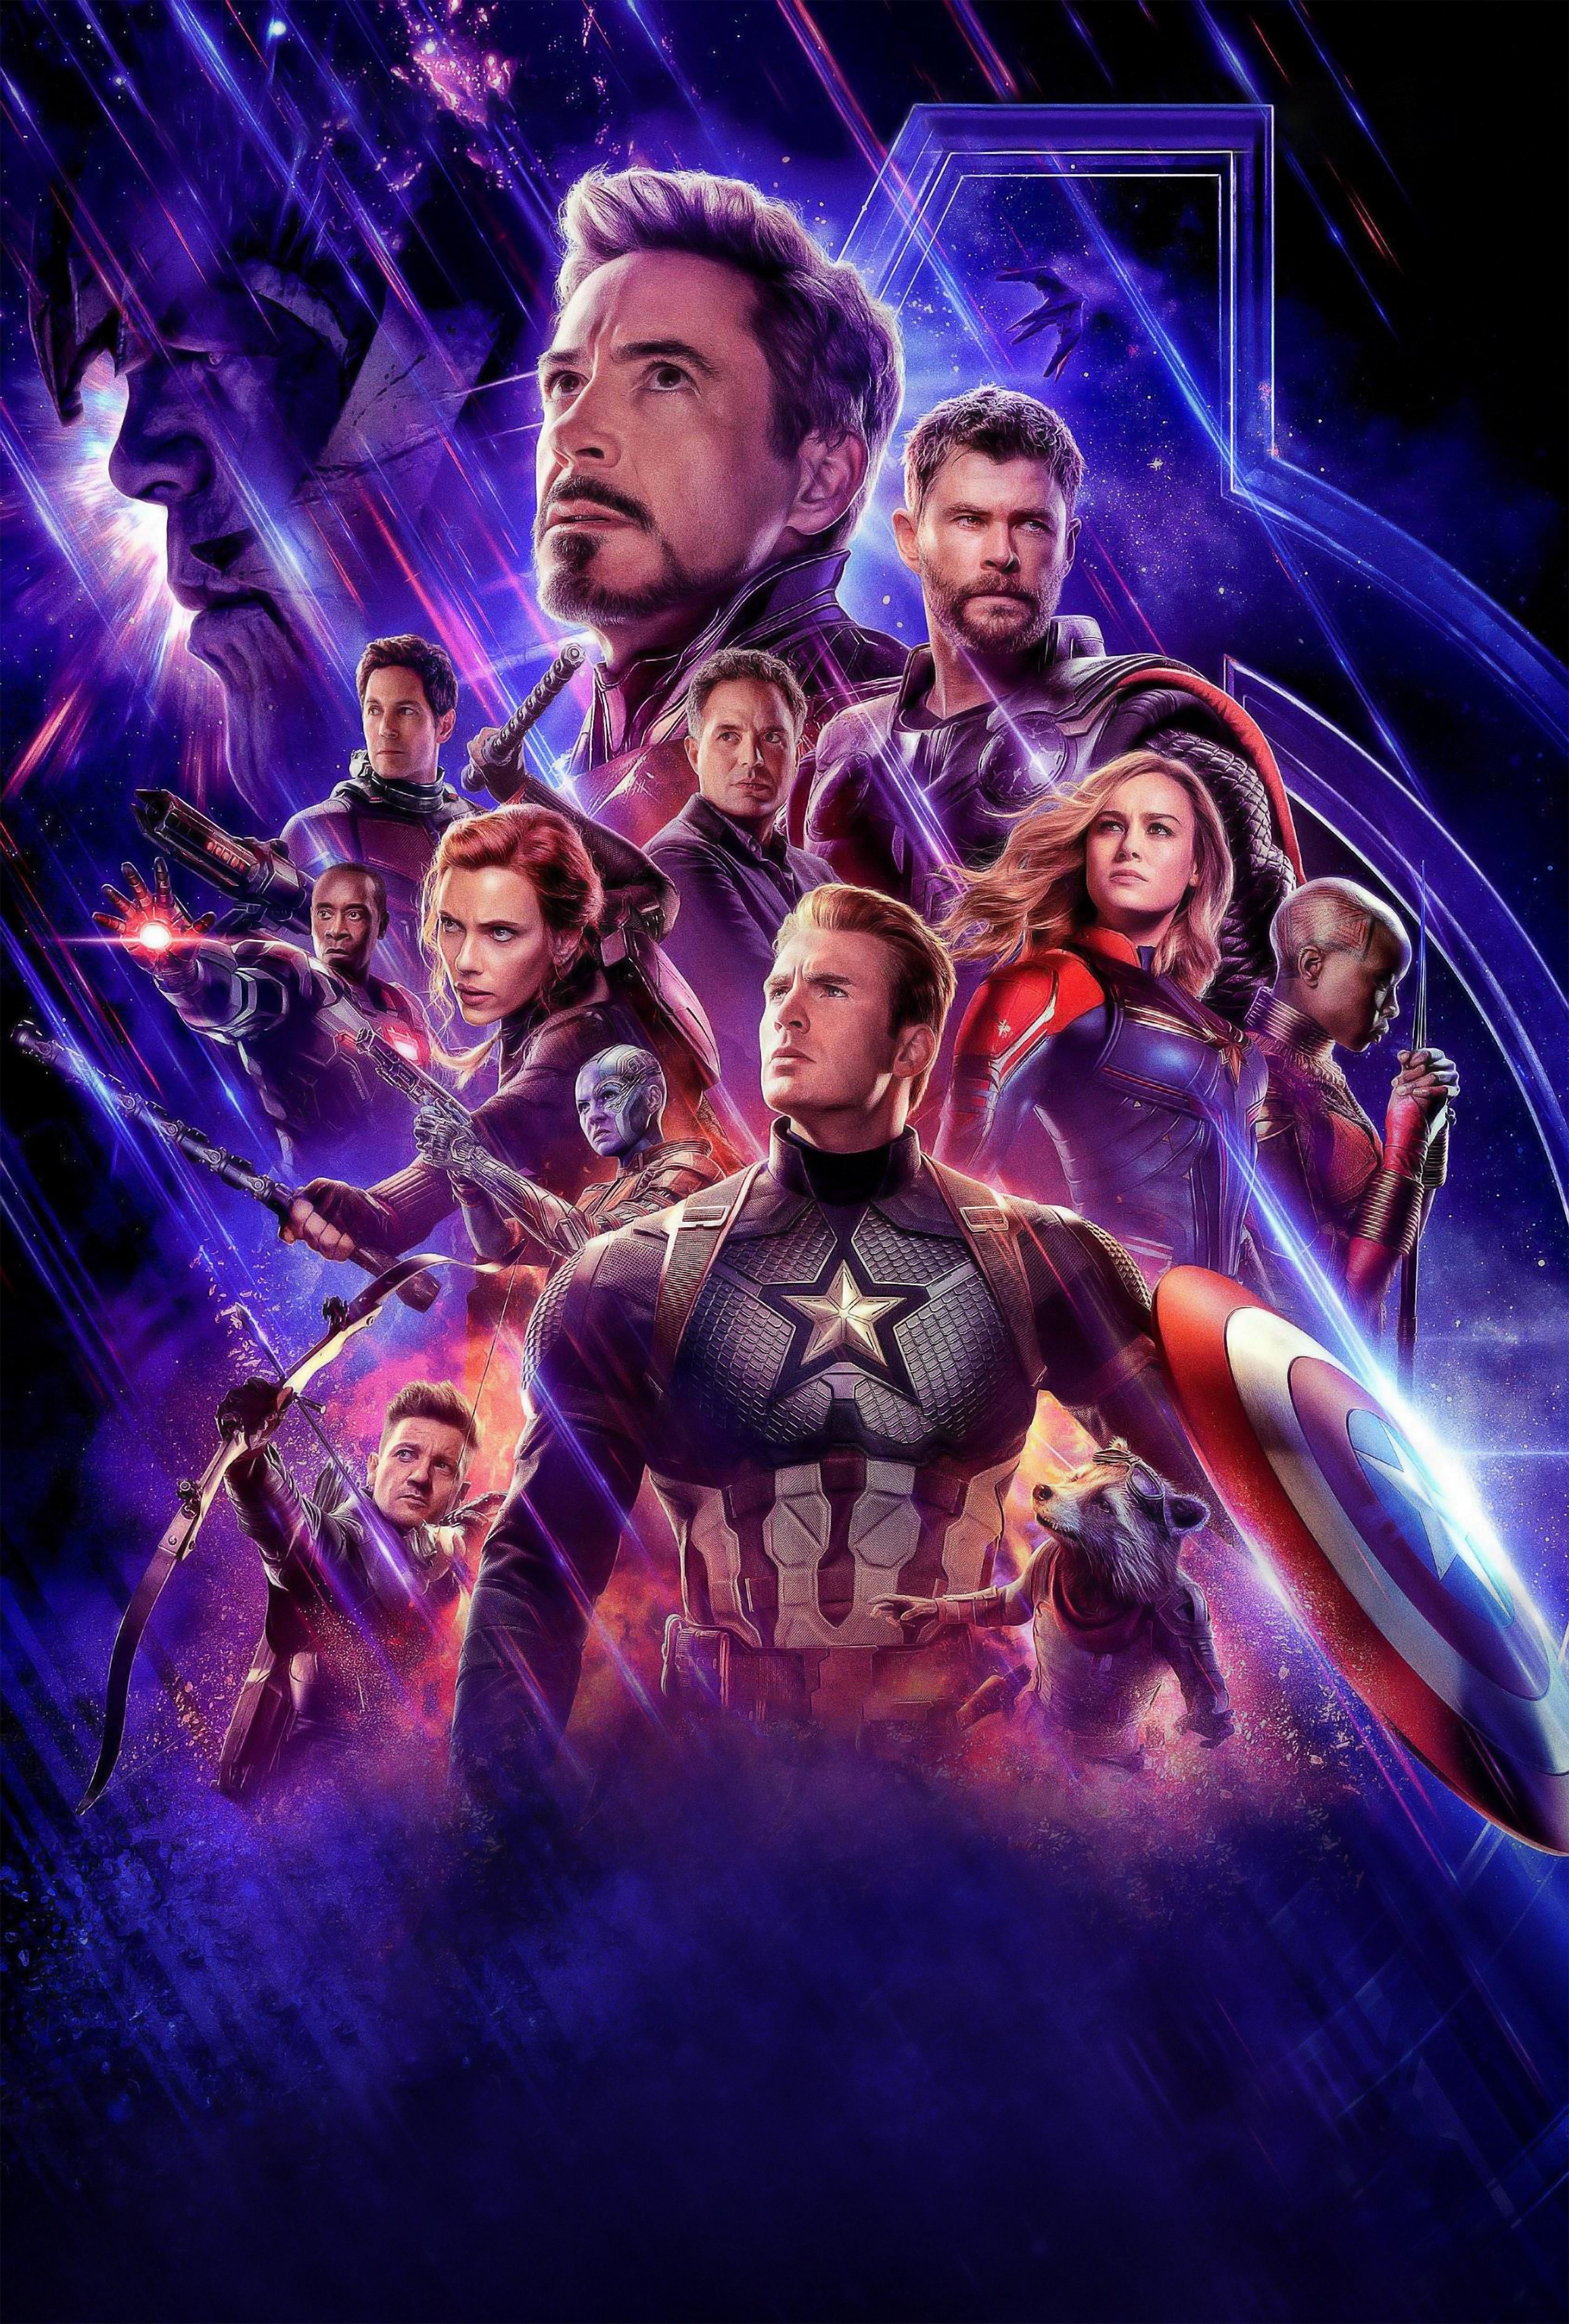 Free download Poster Of Avengers Endgame Movie Wallpaper HD Movies 4K [3376x5000] for your Desktop, Mobile & Tablet. Explore Posters Wallpaper. Posters Wallpaper, Wallpaper Posters Designs, Wallpapering with Posters